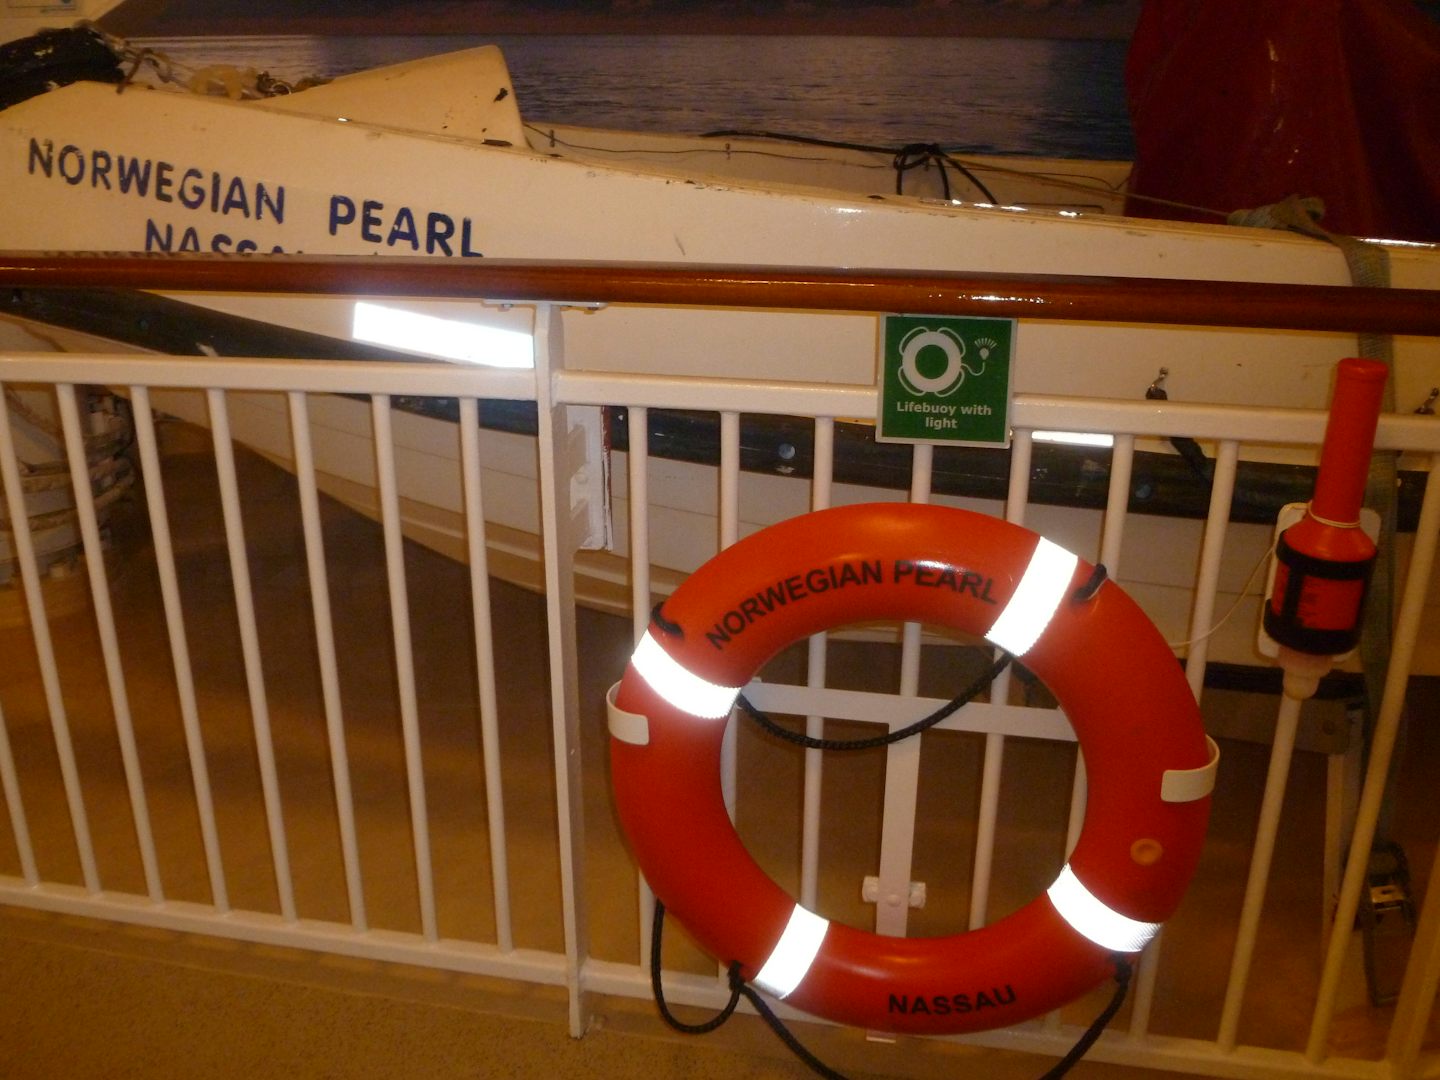 The Life Preserver says it all